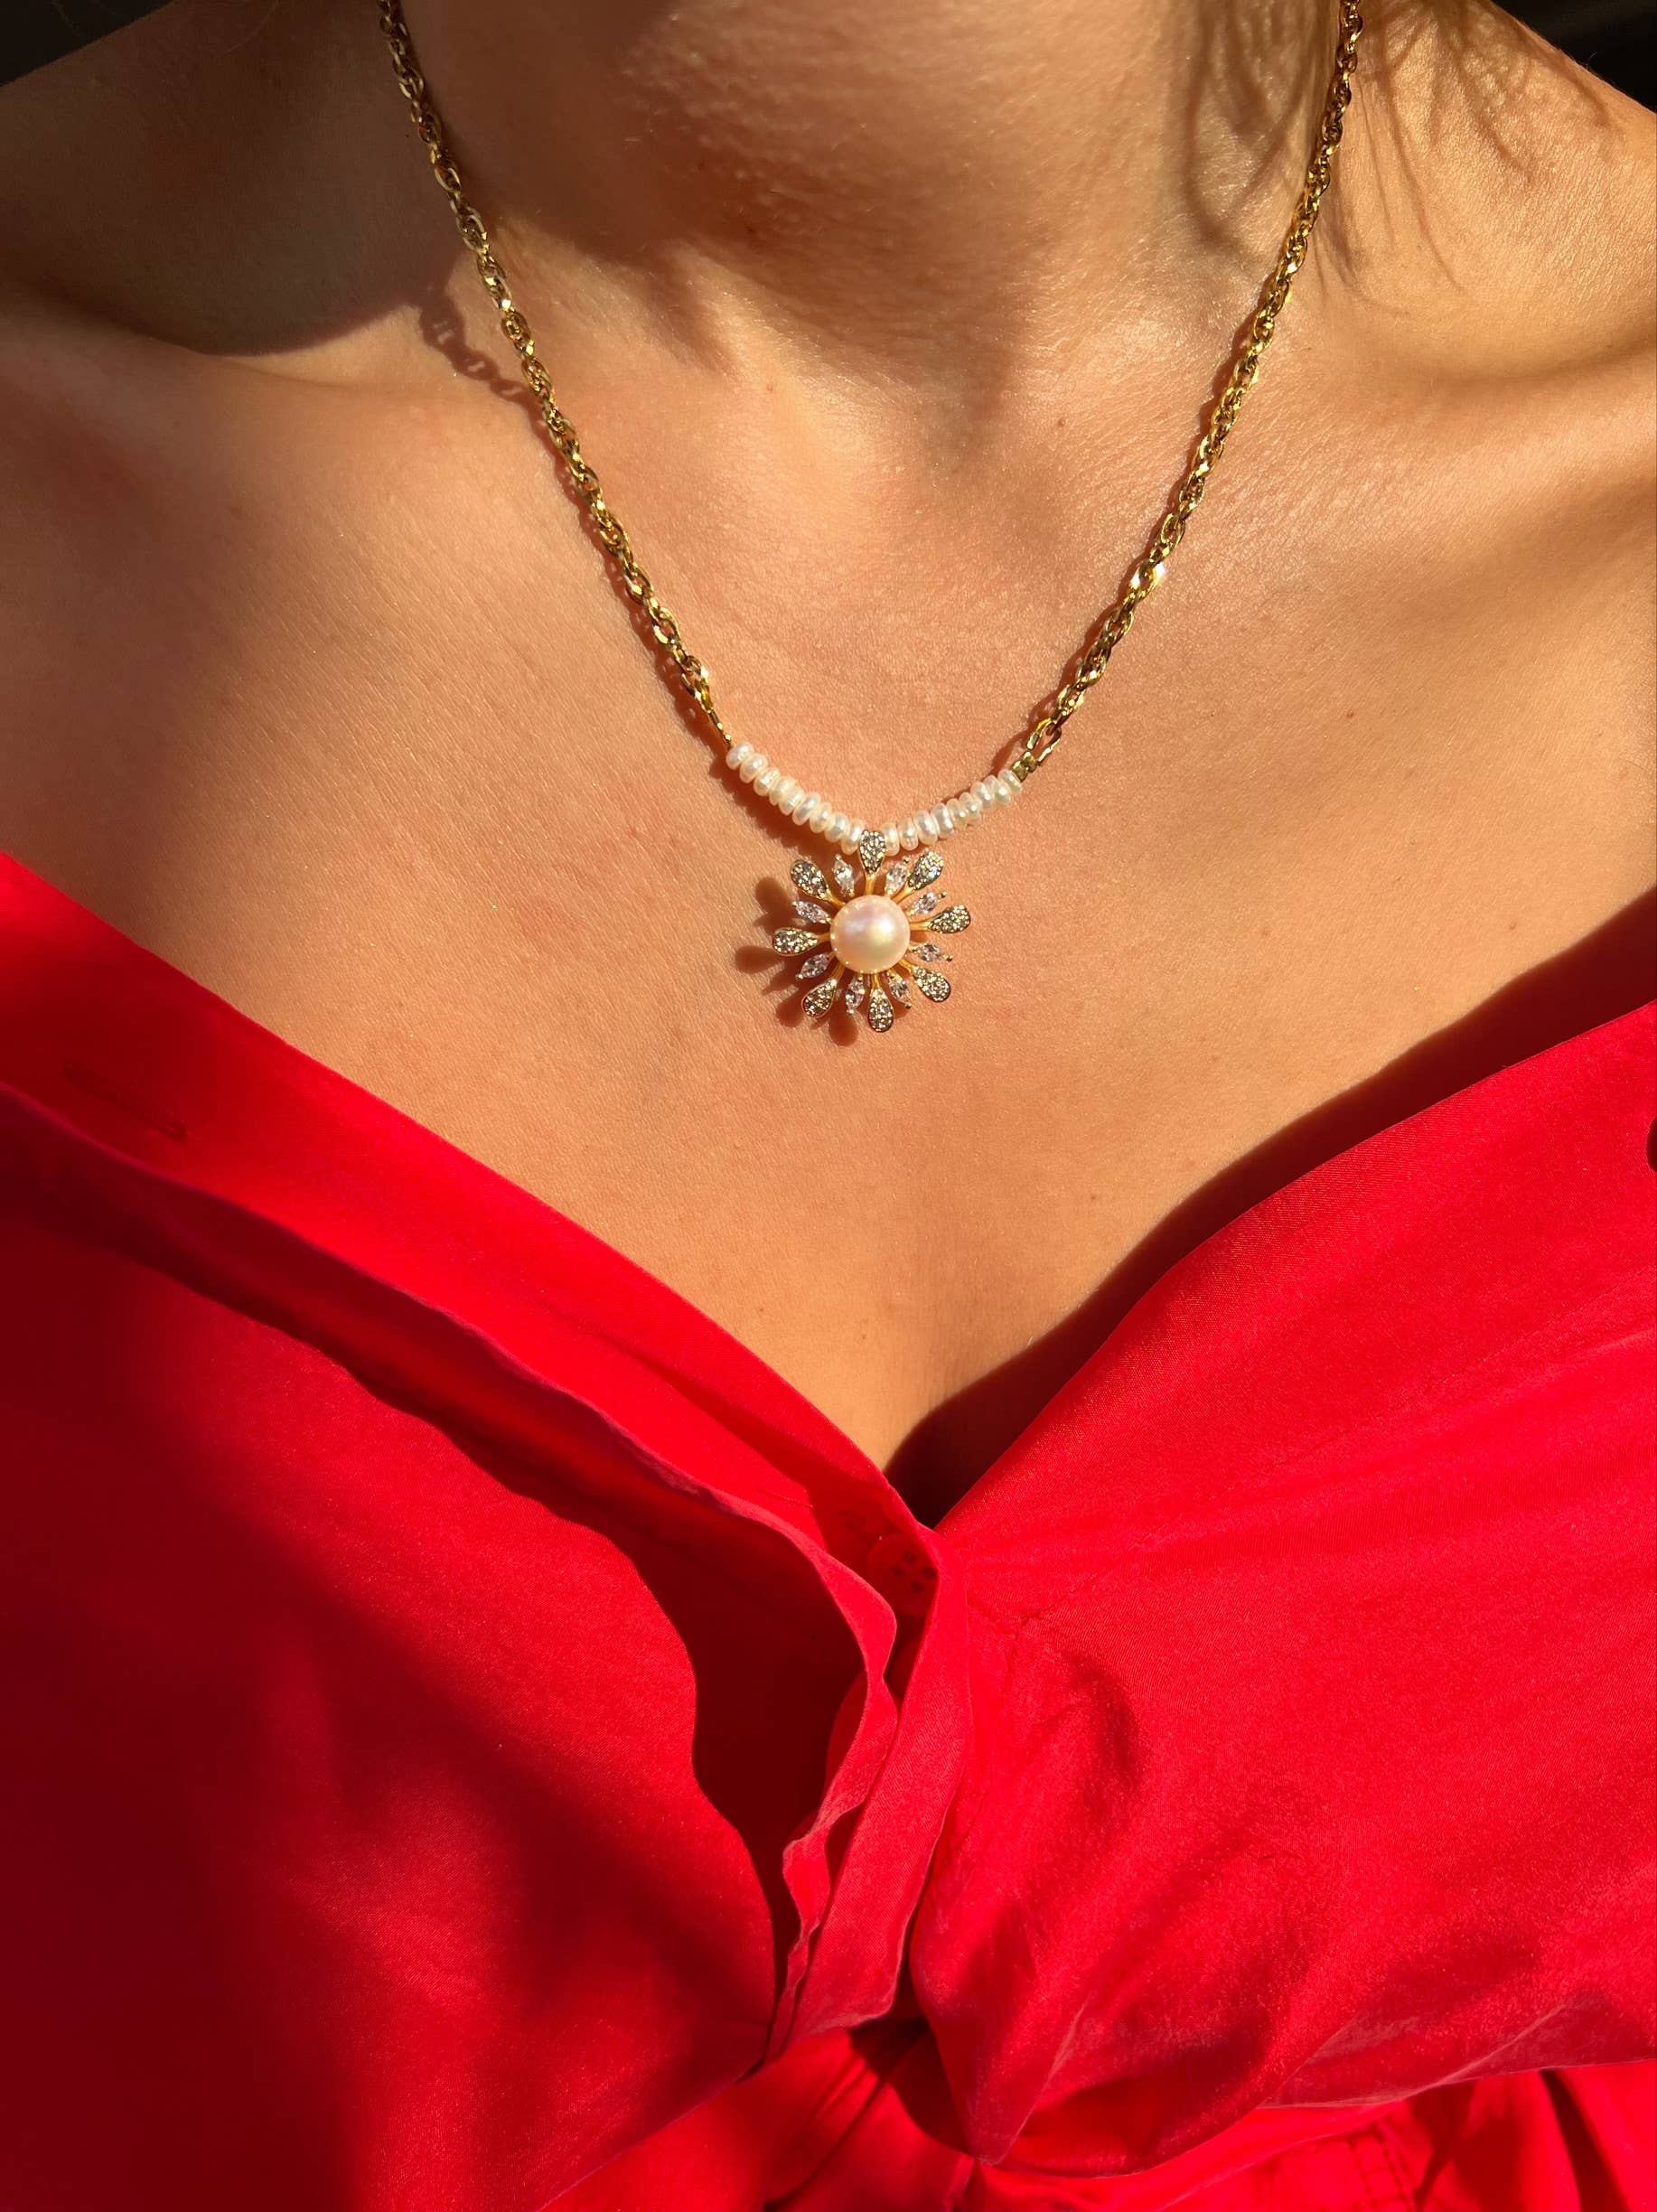 Retro Flower Pearl Daisy Pearl Chain With Pendant European & American  Fashion With Personalized Personality From Fuutao, $24.99 | DHgate.Com